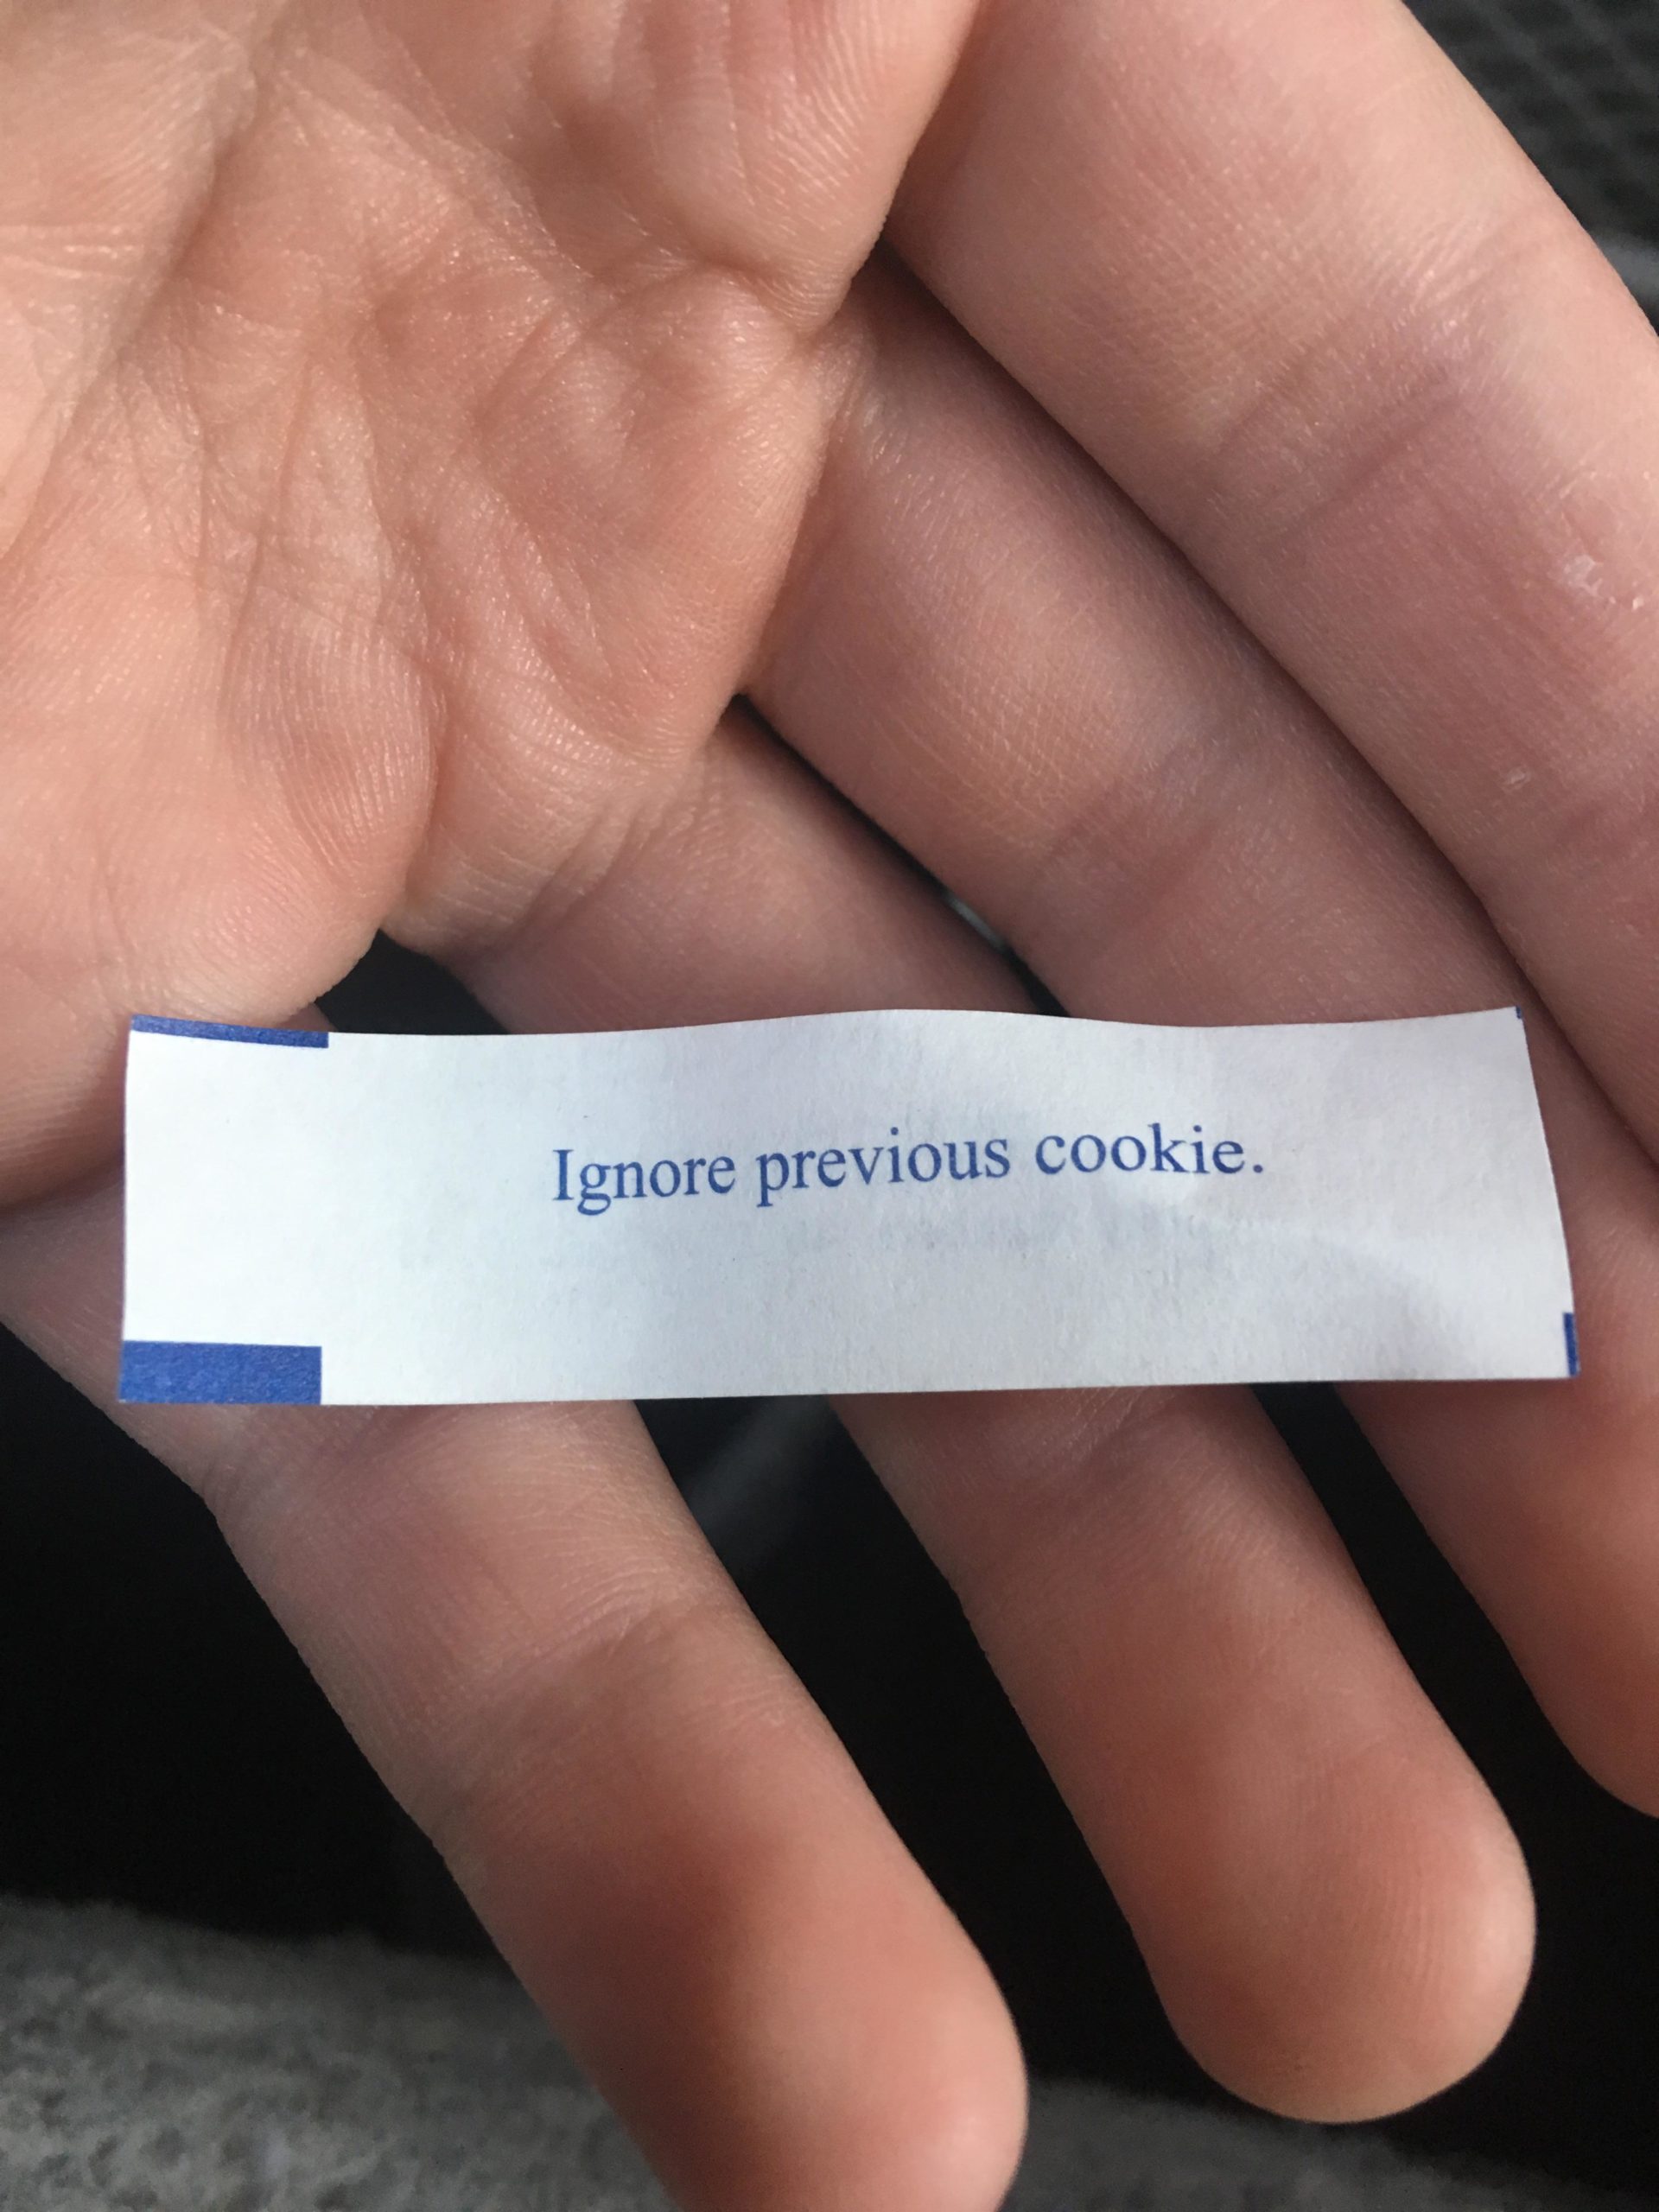 This+fortune+cookie+is+ominous.